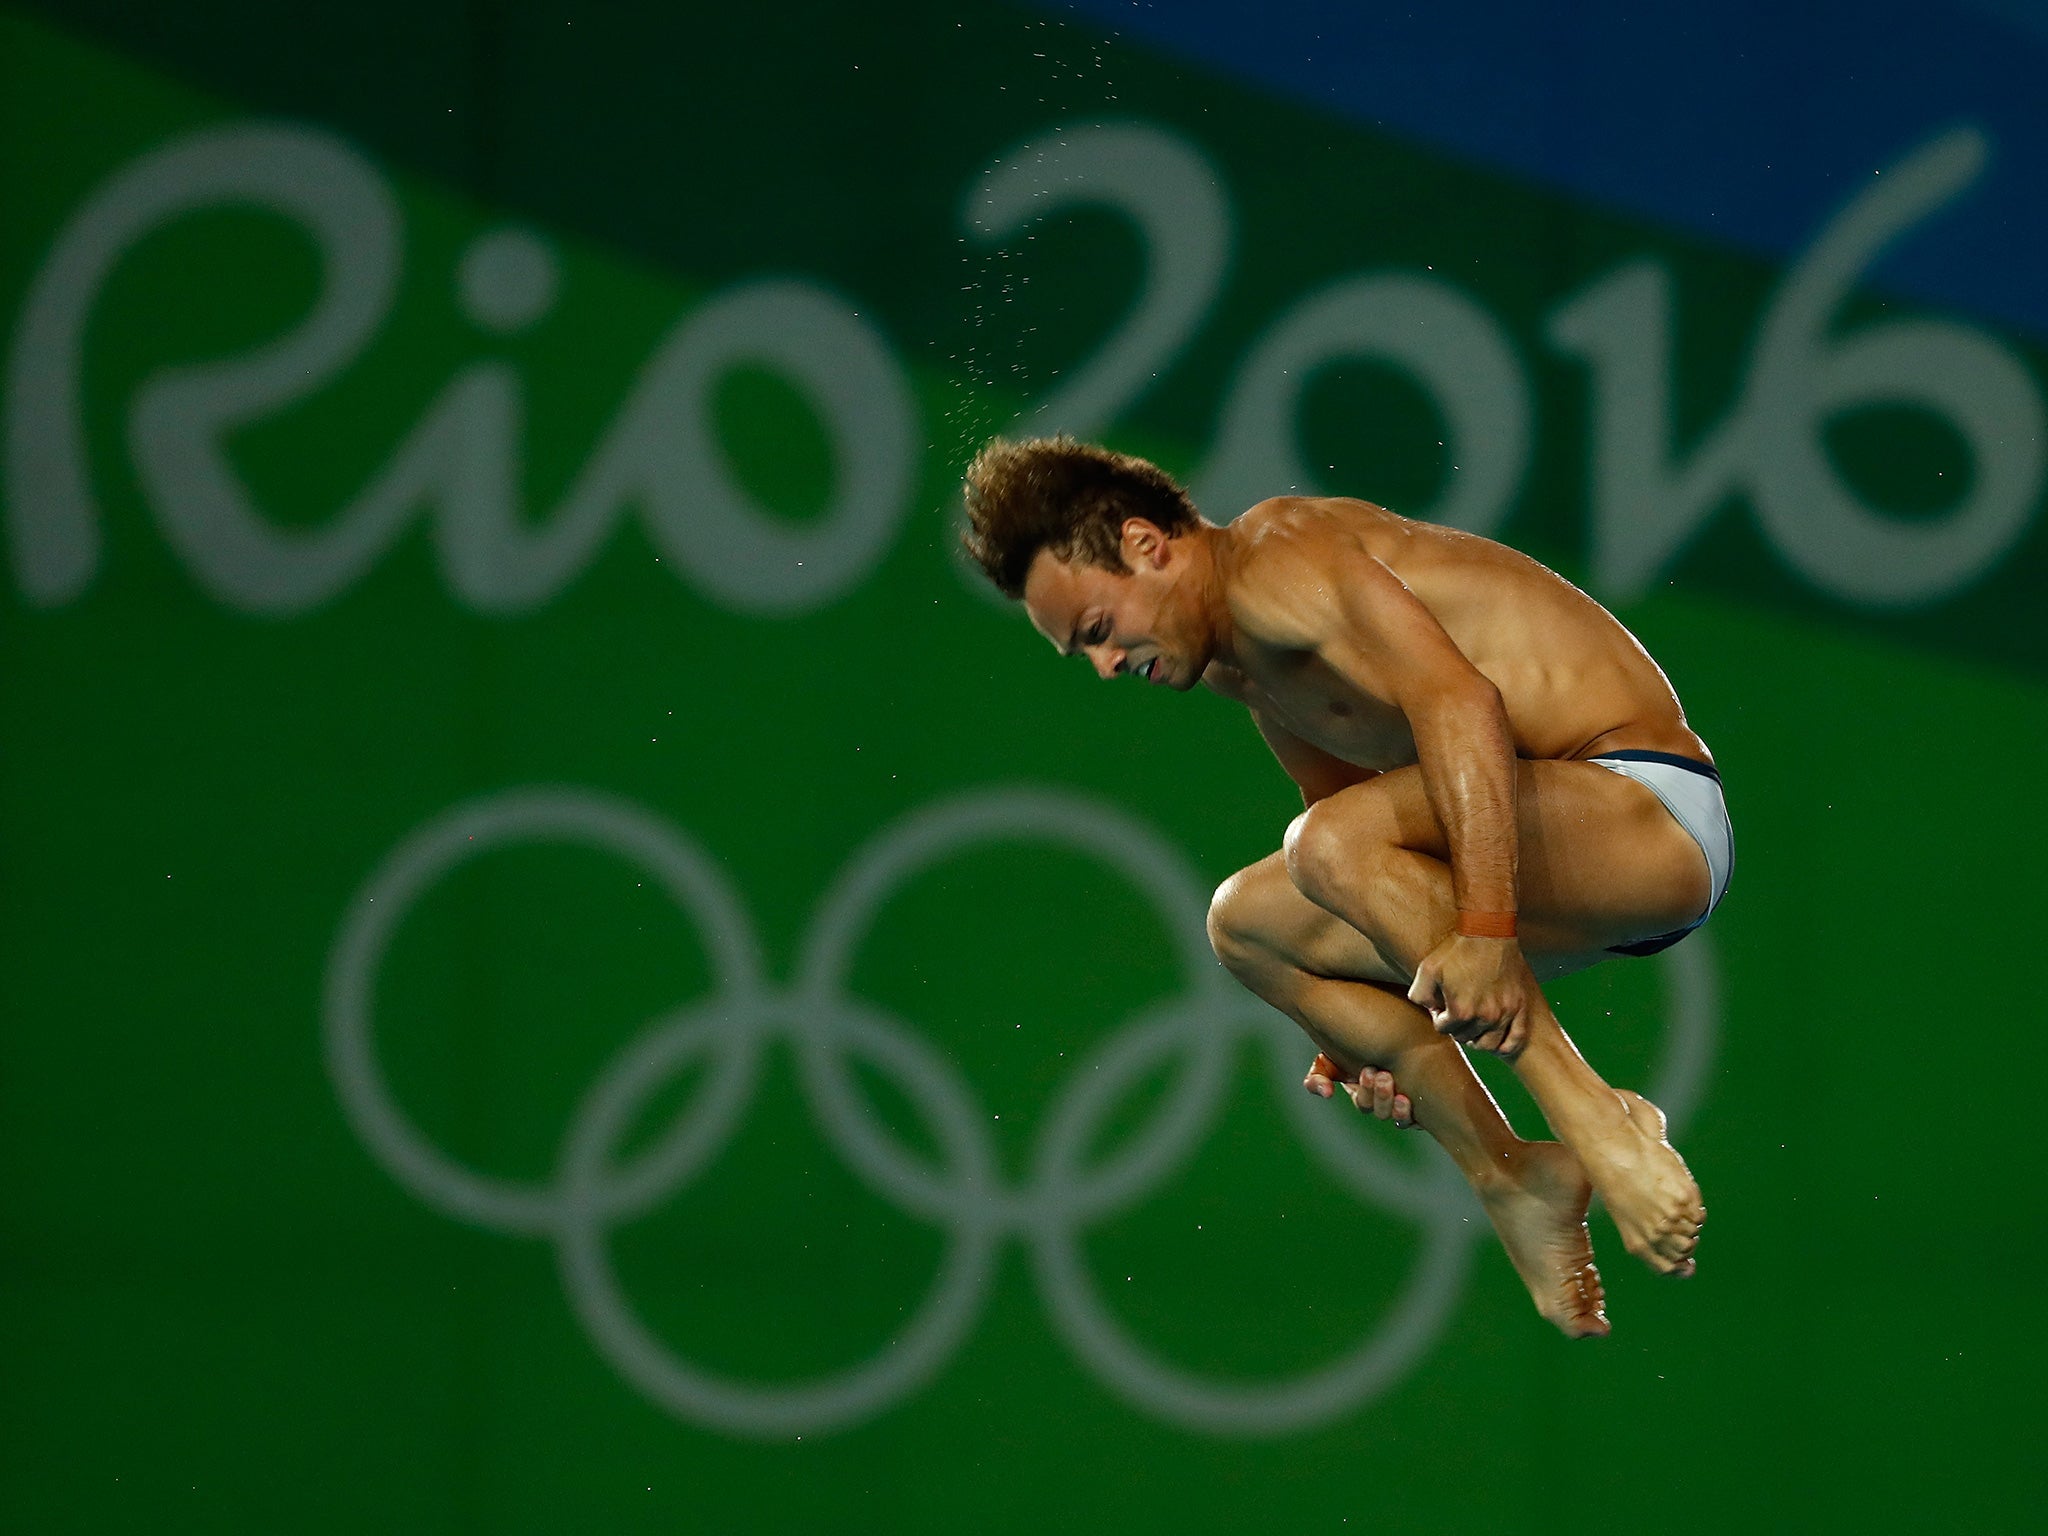 Daley won London 2012 bronze in the event four years ago